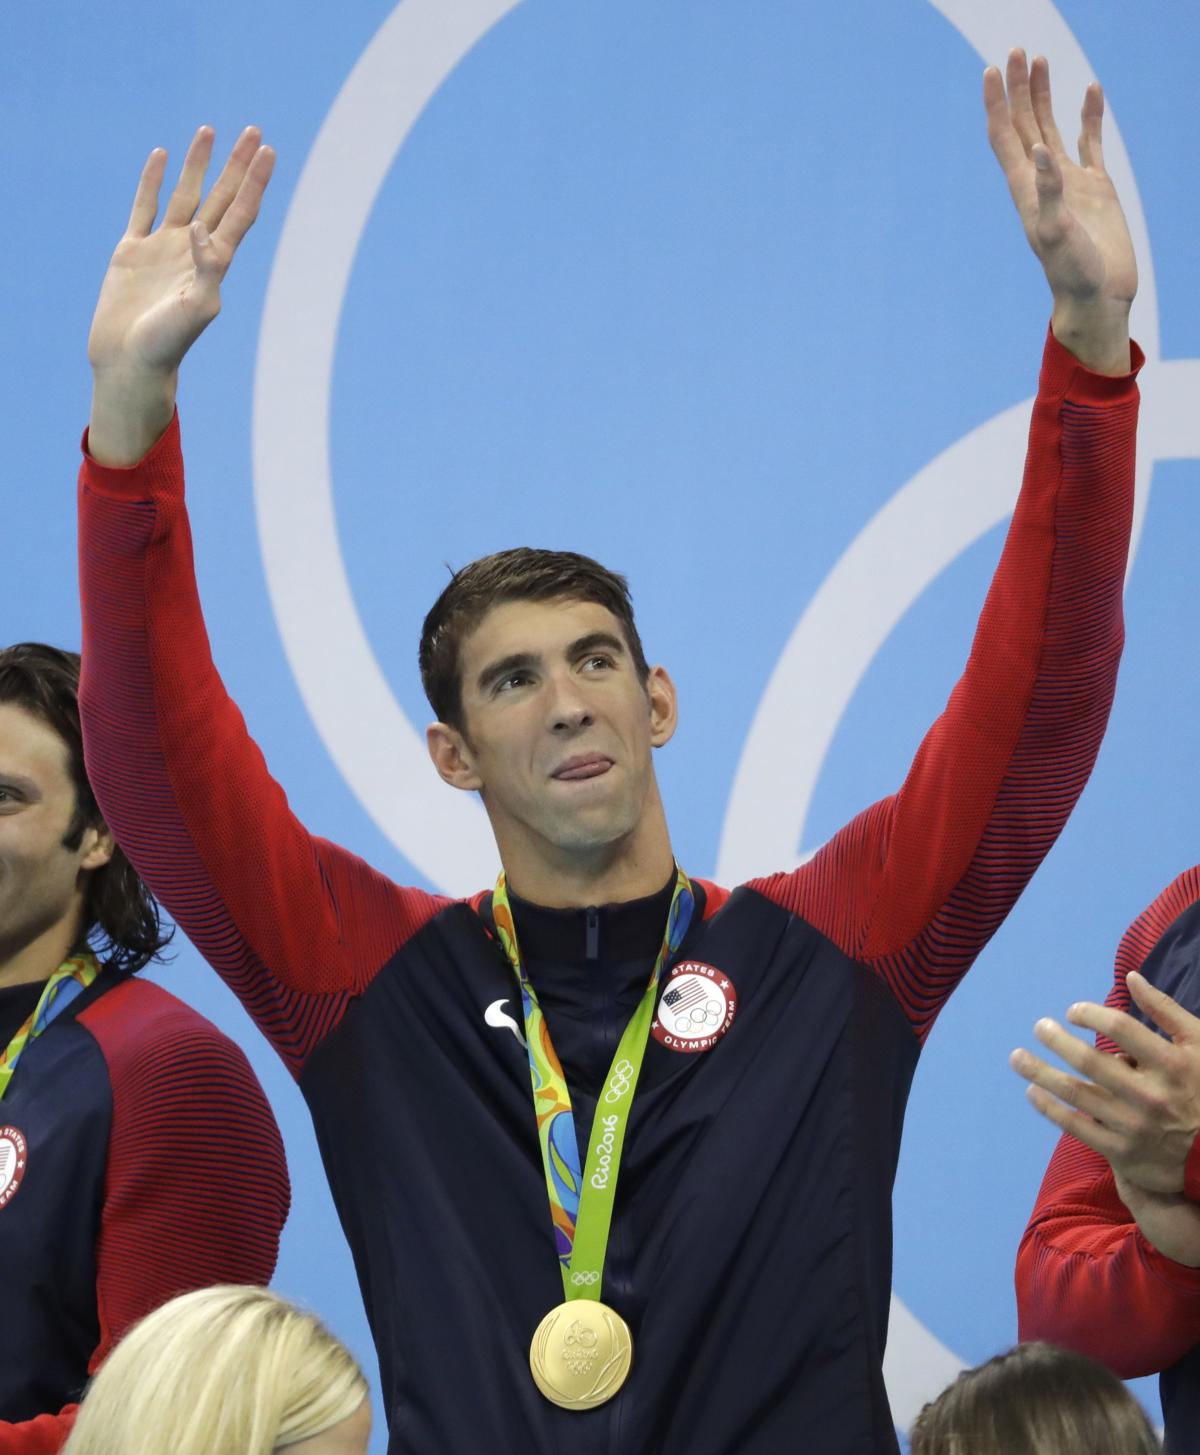 TV Ratings Olympics Viewership Soars for Michael Phelps’ Final Event